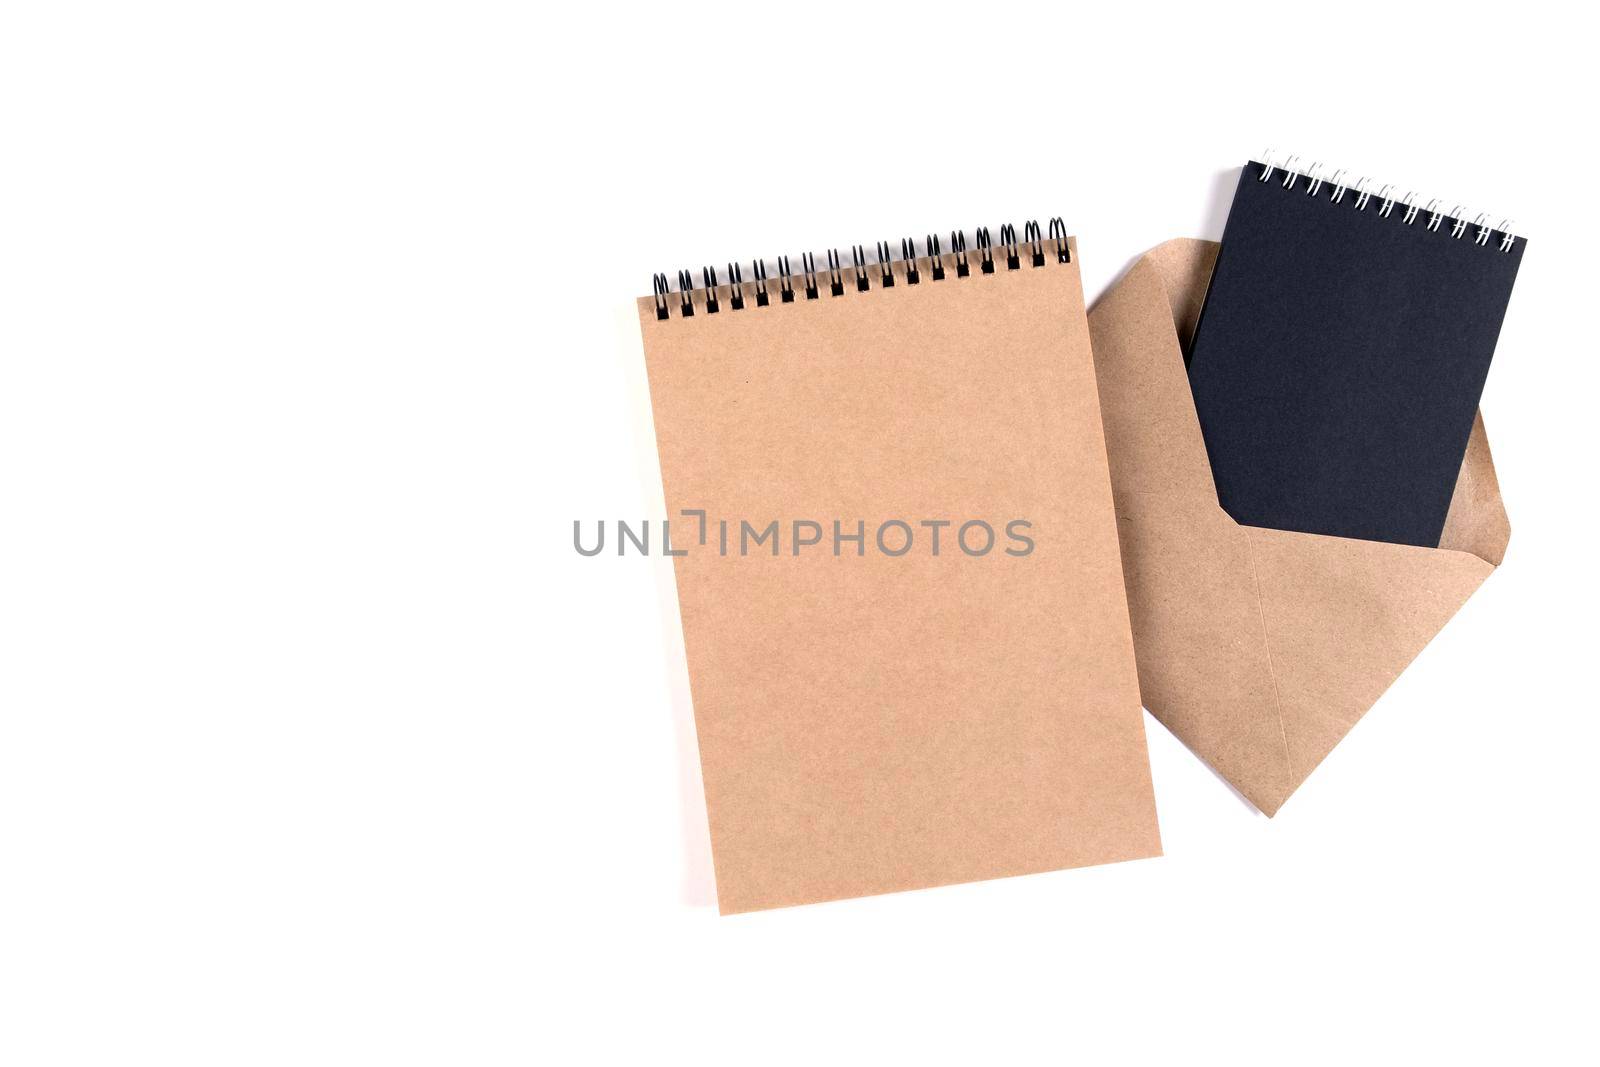 Blank spiral notepads and a recycled envelope by OlgaGubskaya